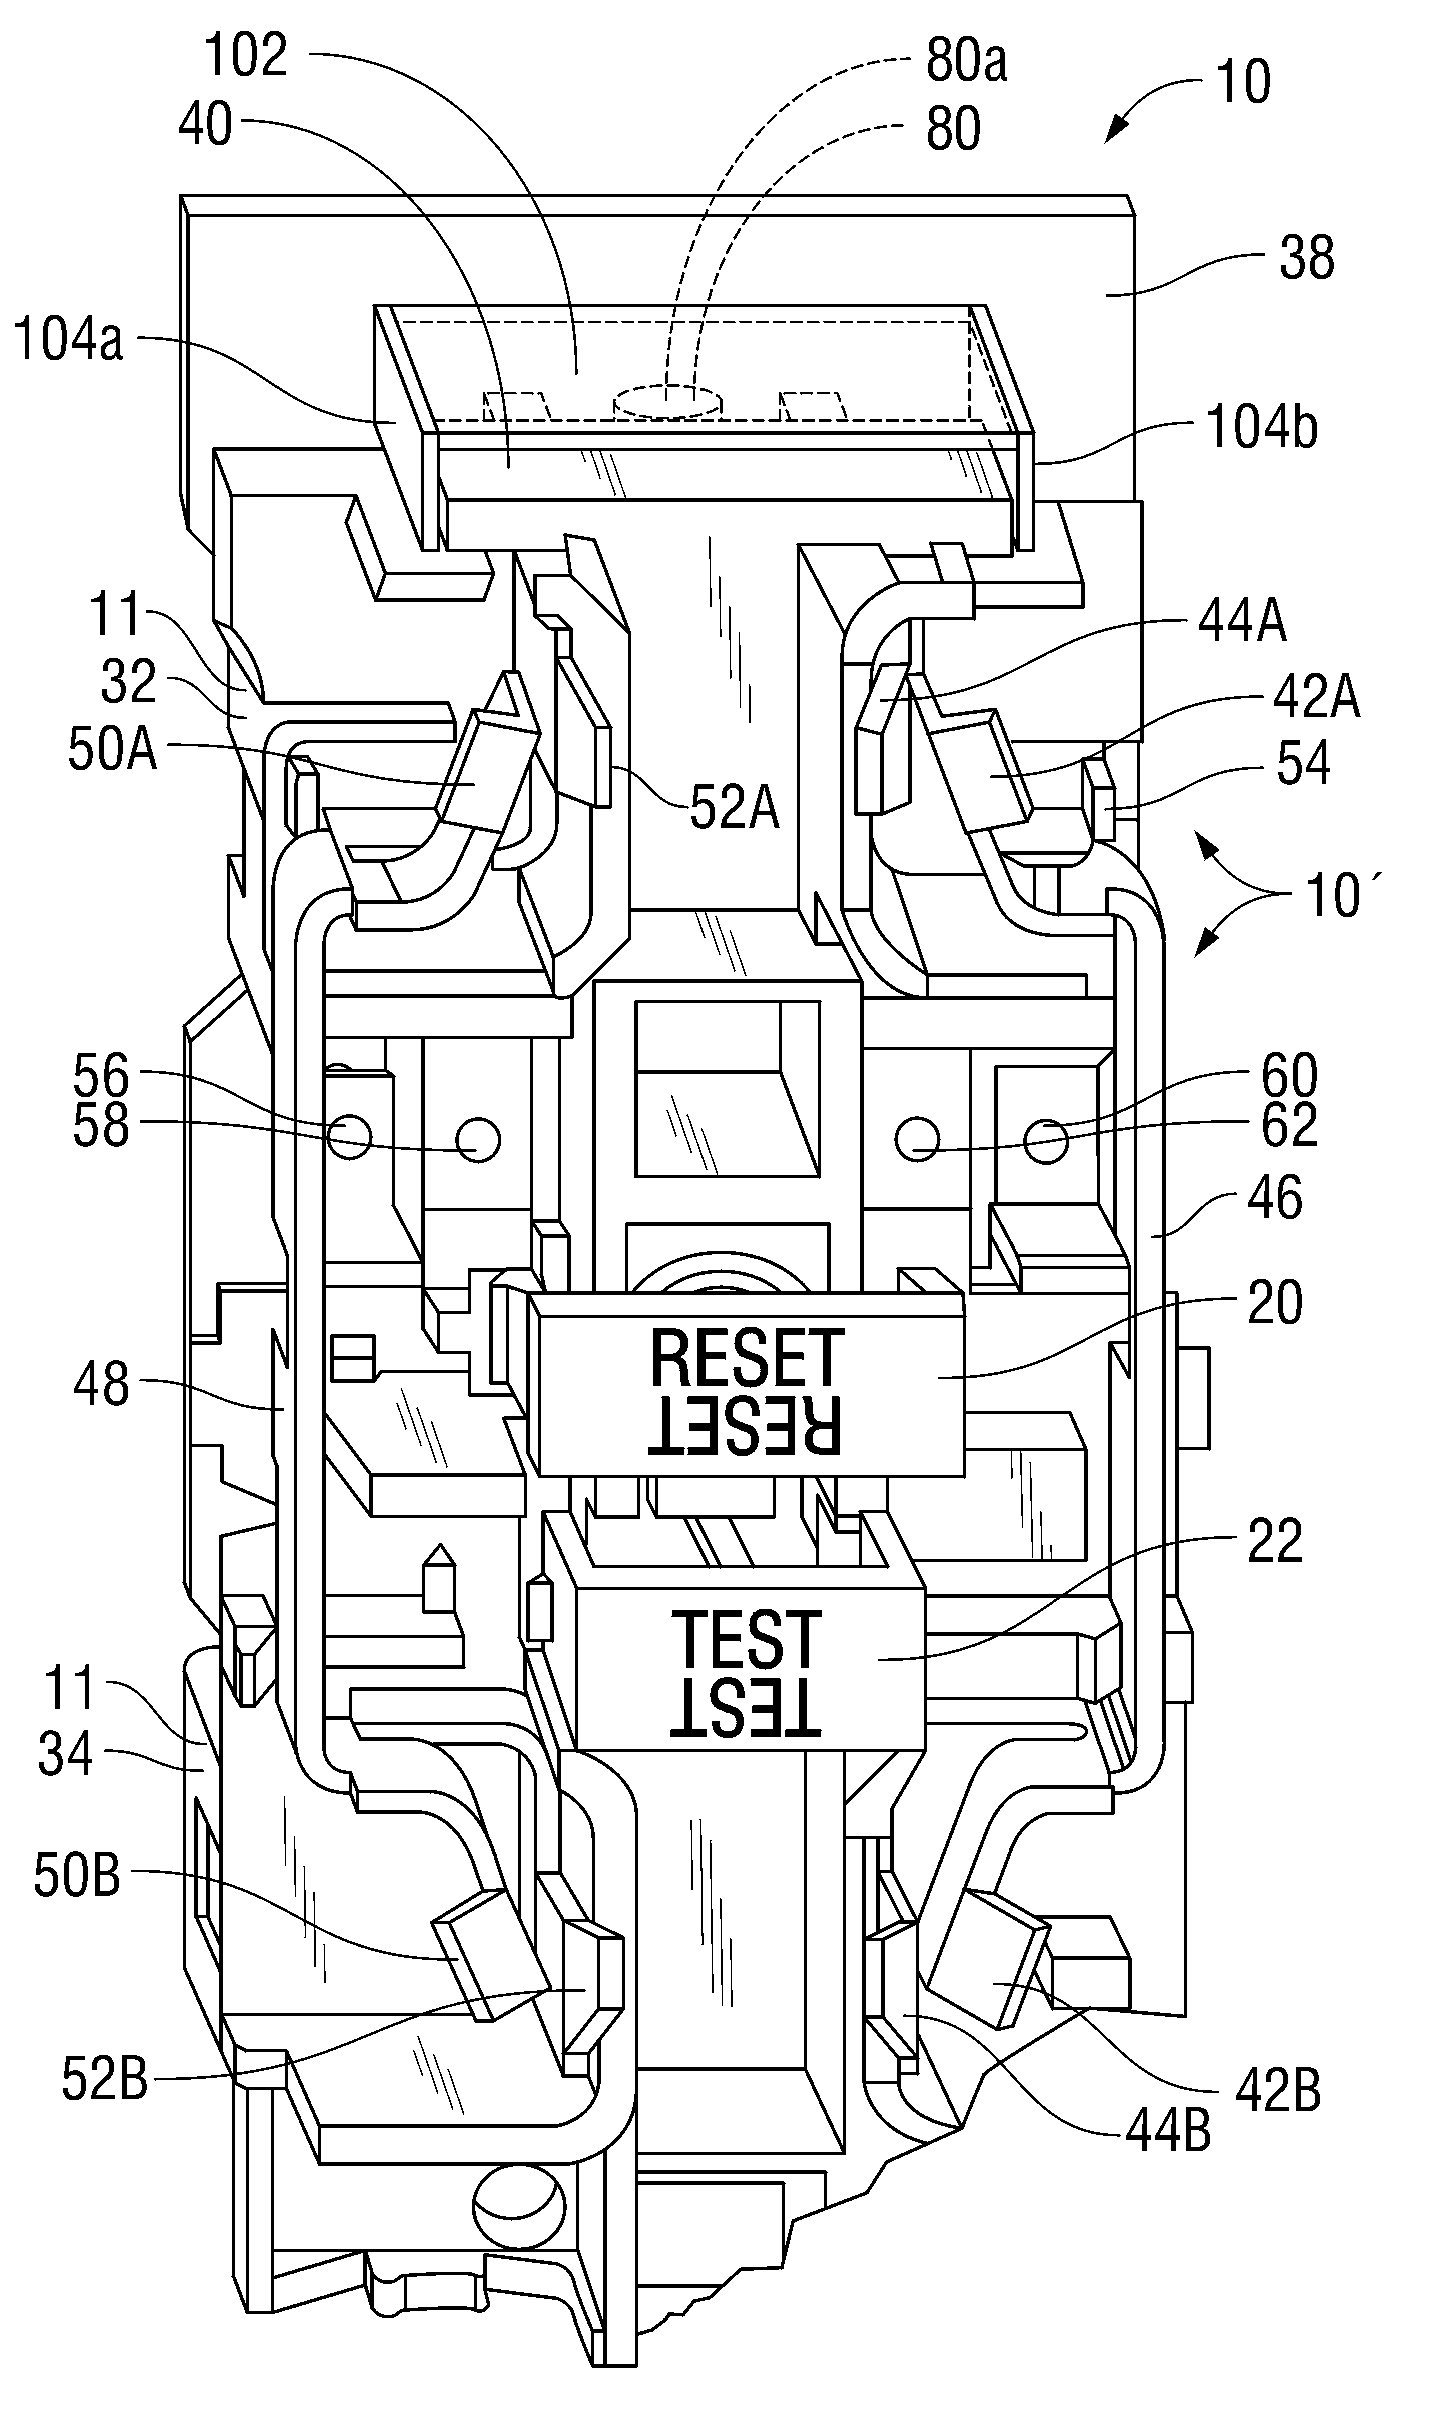 Detecting and sensing actuation in a circuit interrupting device